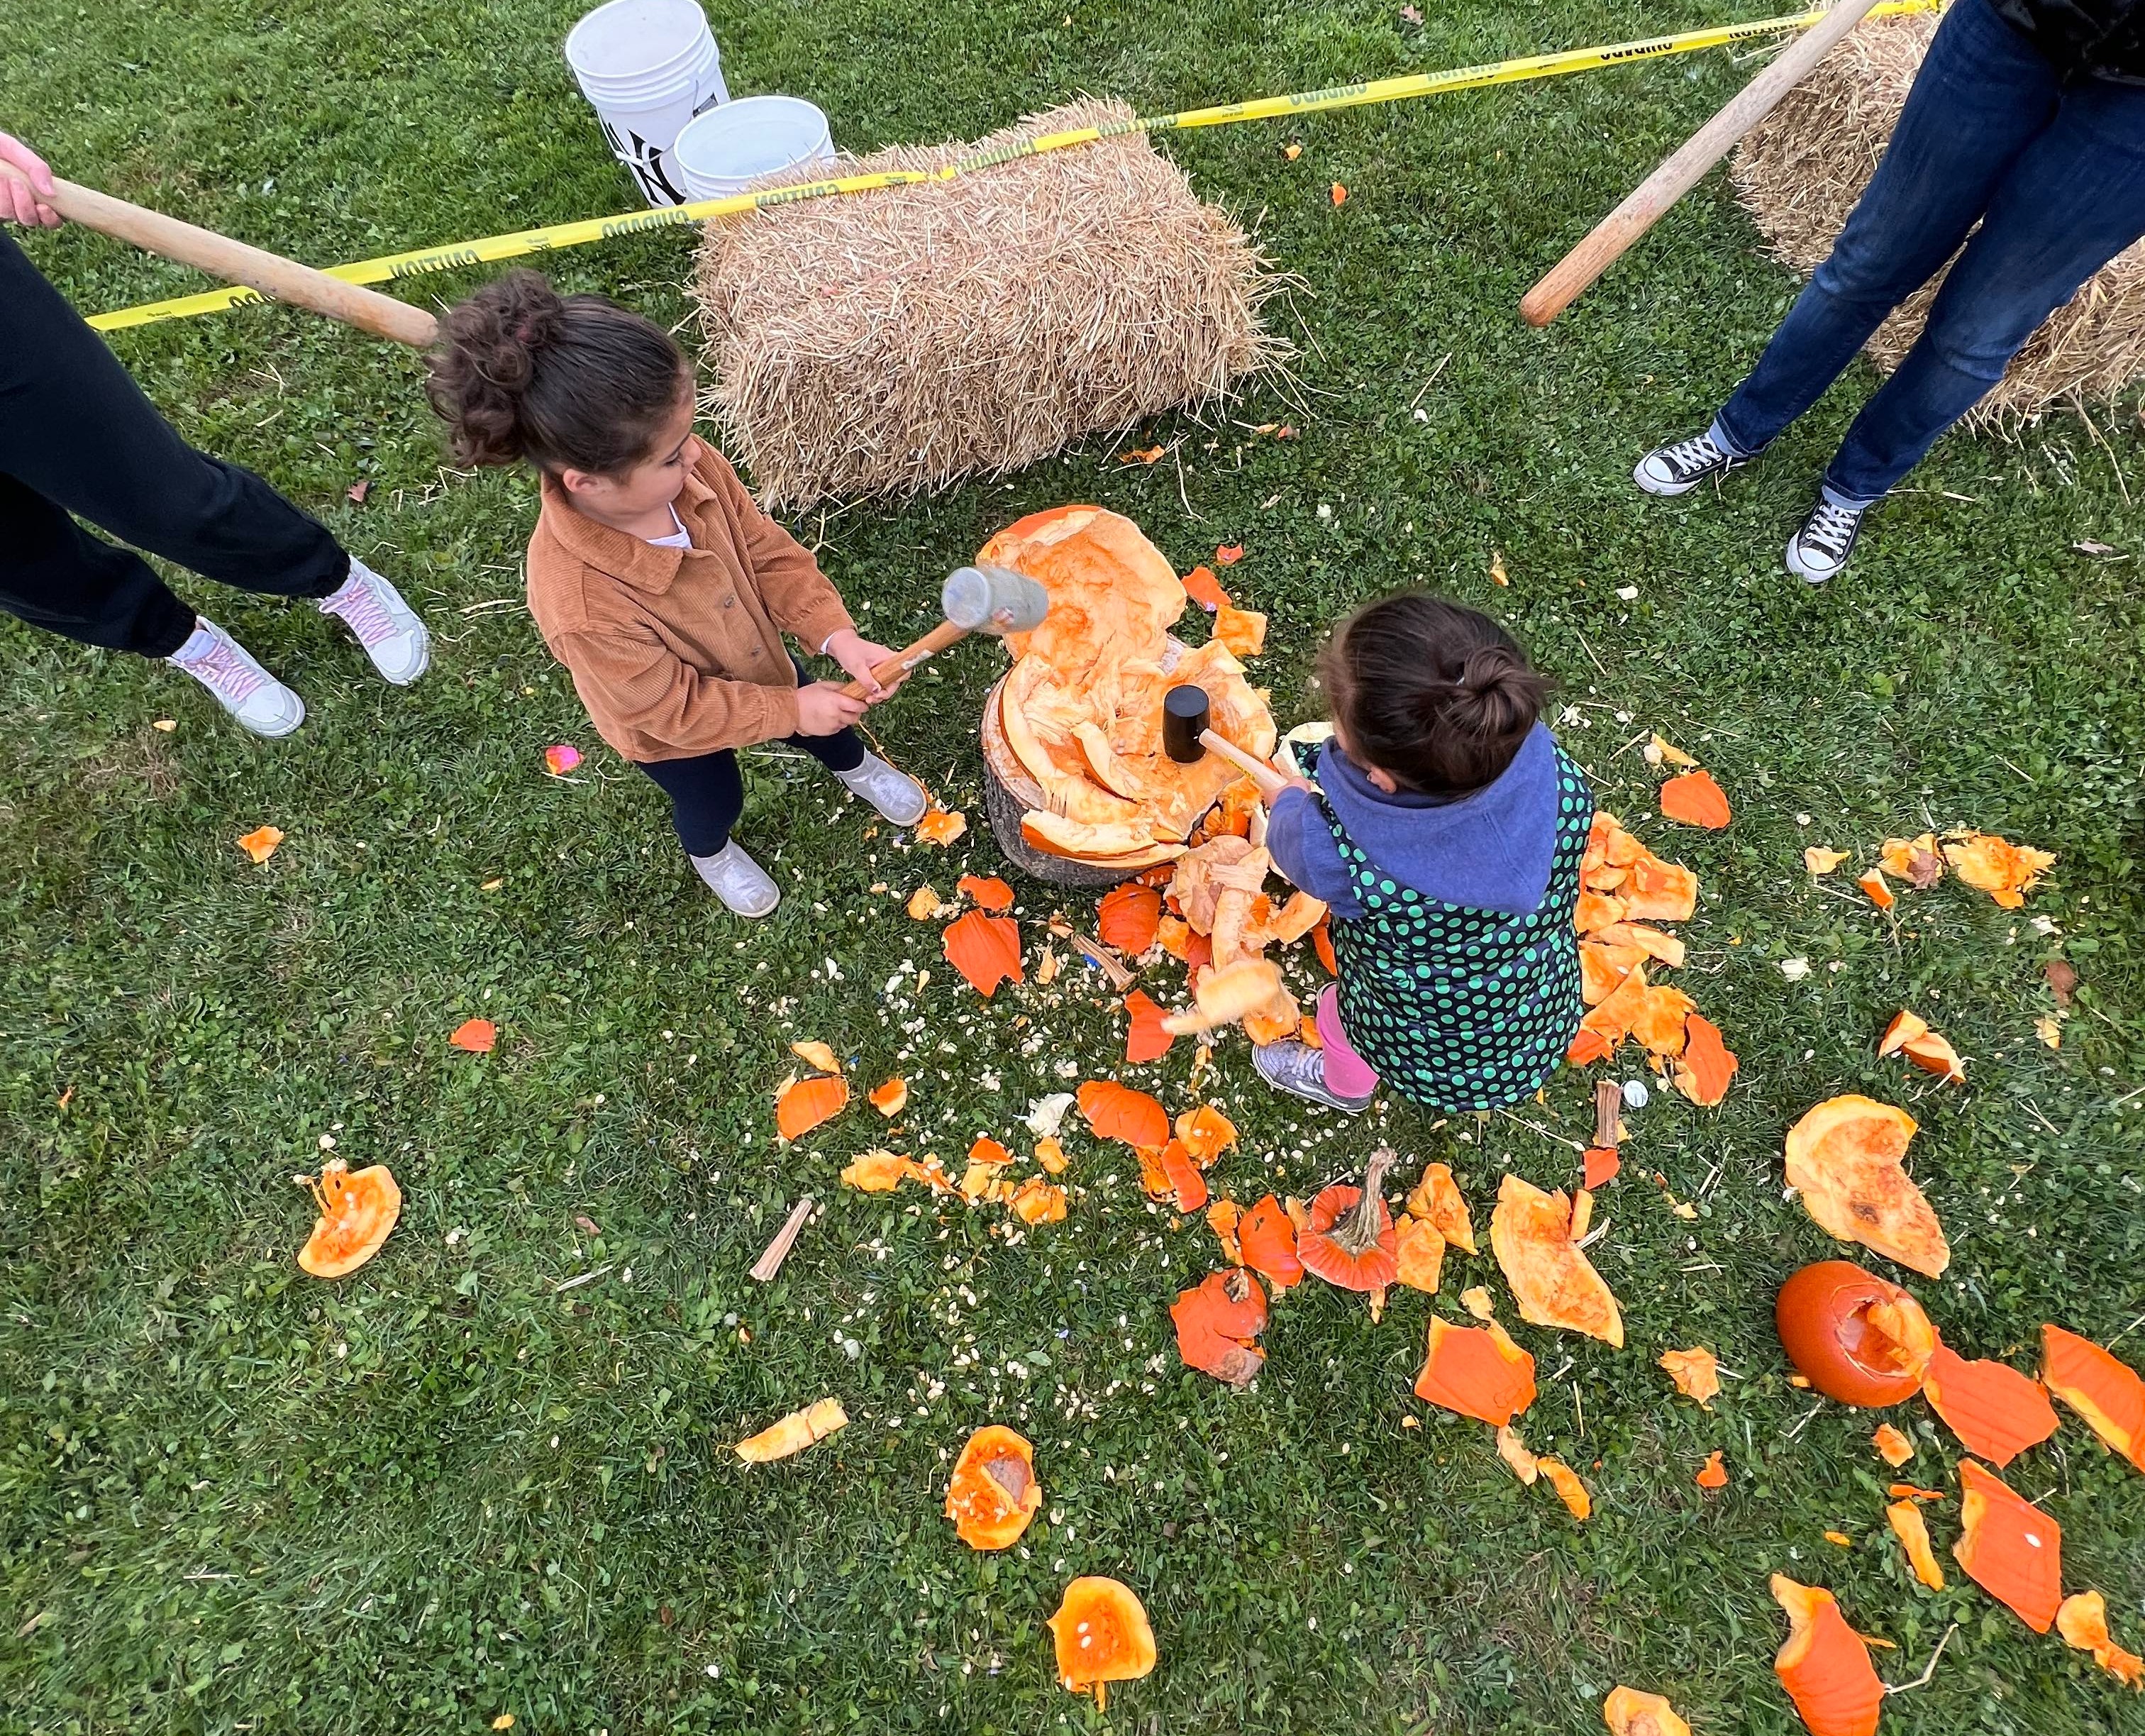 two students smash pumpkin with mallets